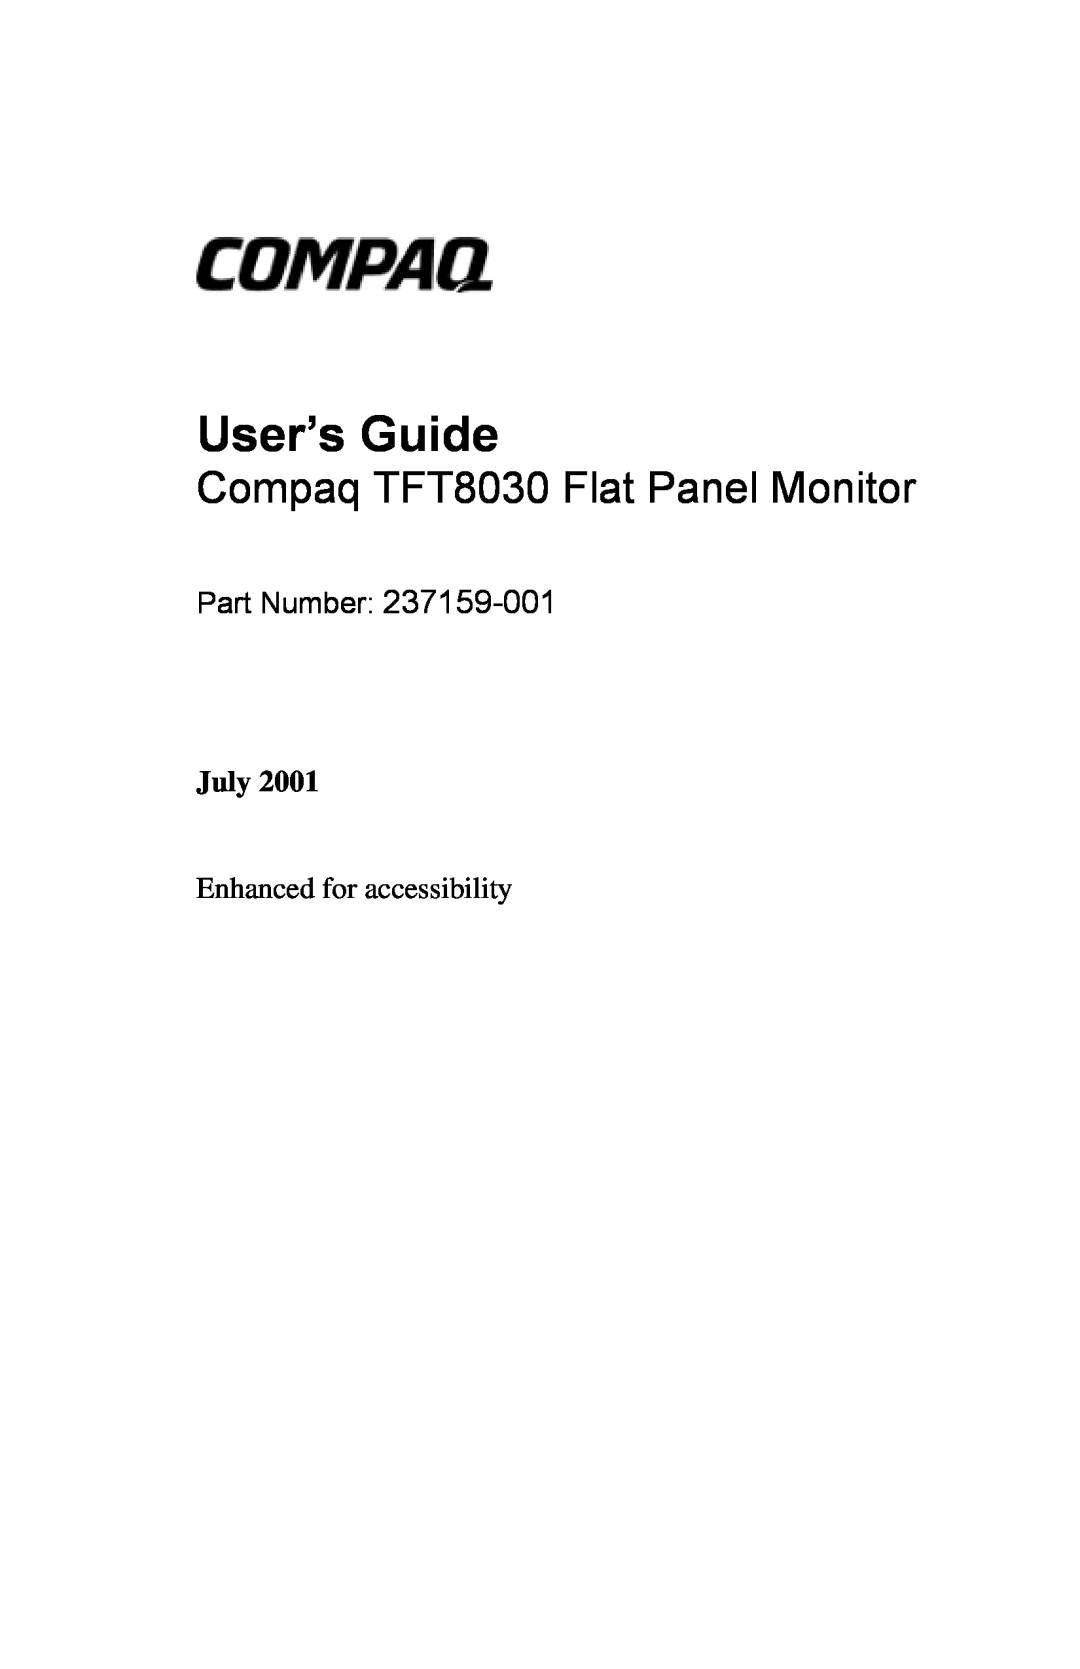 Compaq manual July, User’s Guide, Compaq TFT8030 Flat Panel Monitor, Part Number 